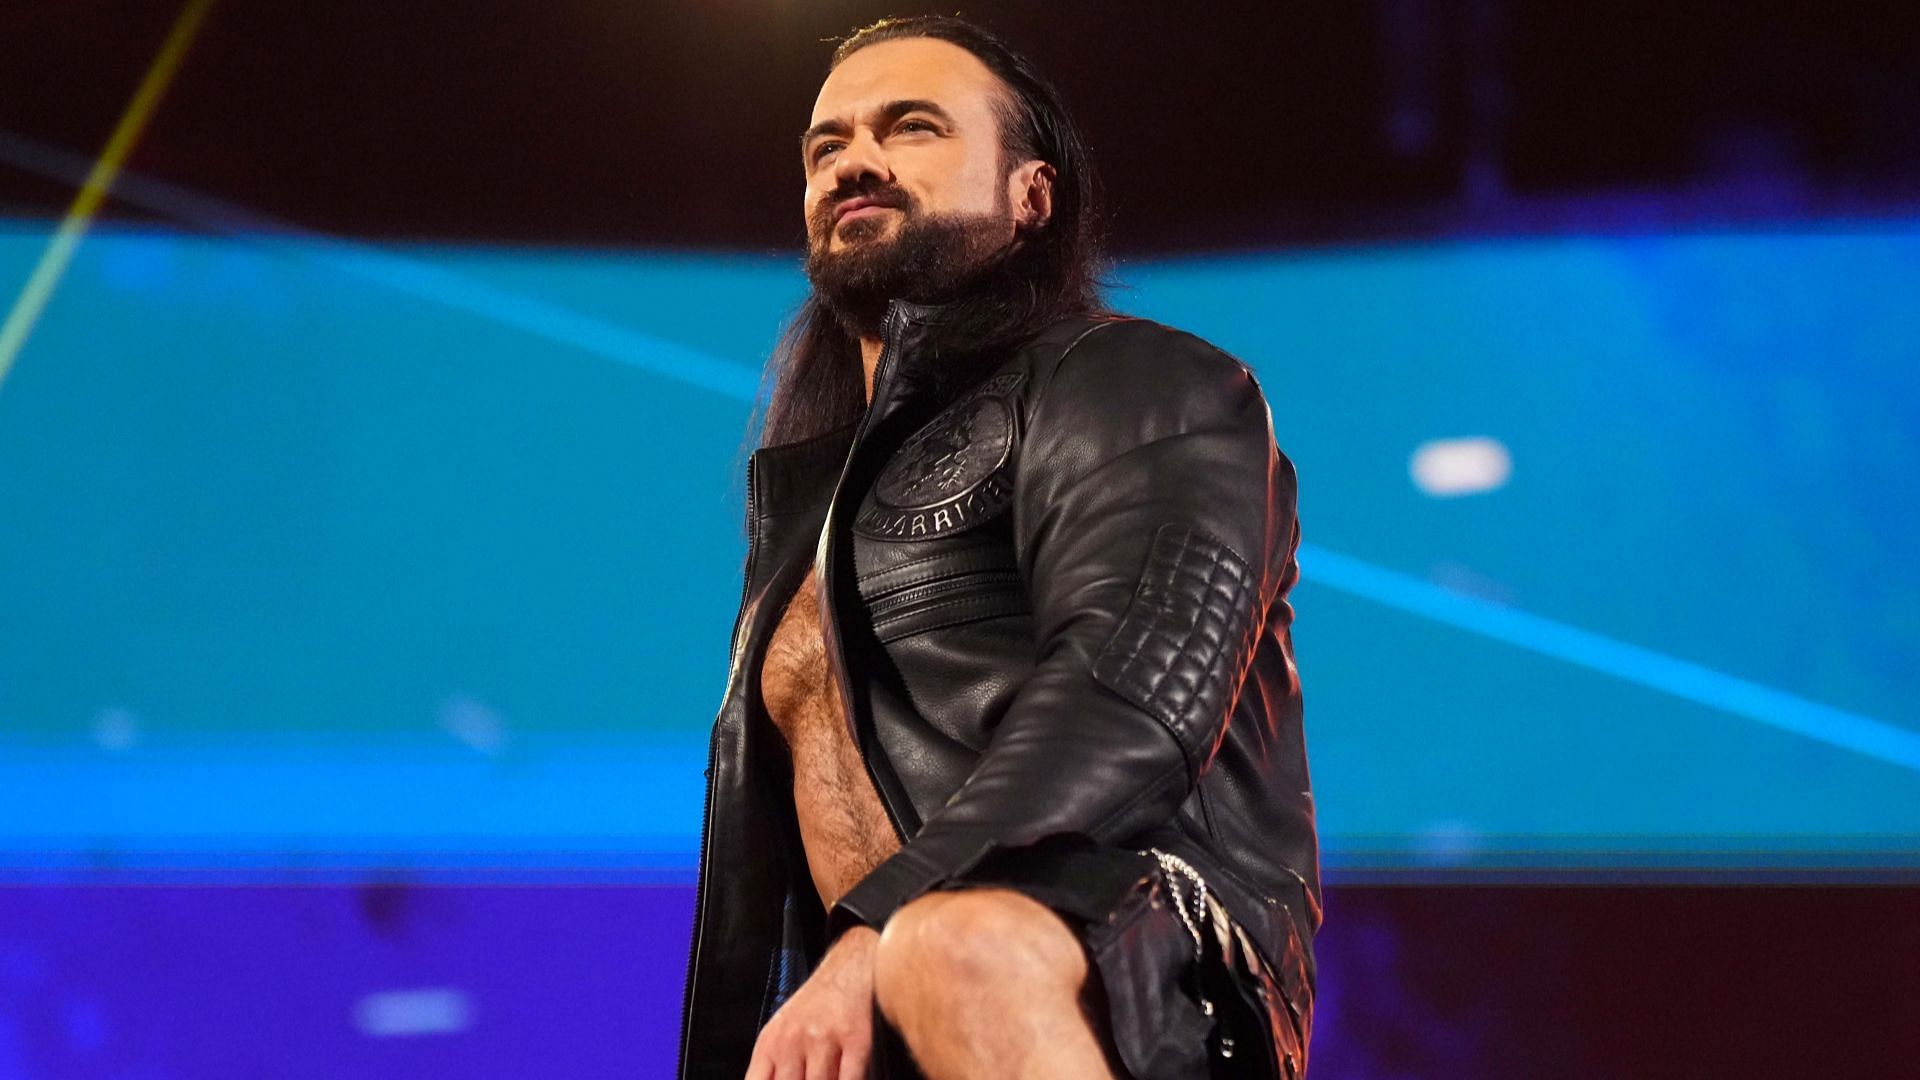 Drew McIntyre stands tall in the ring on WWE RAW